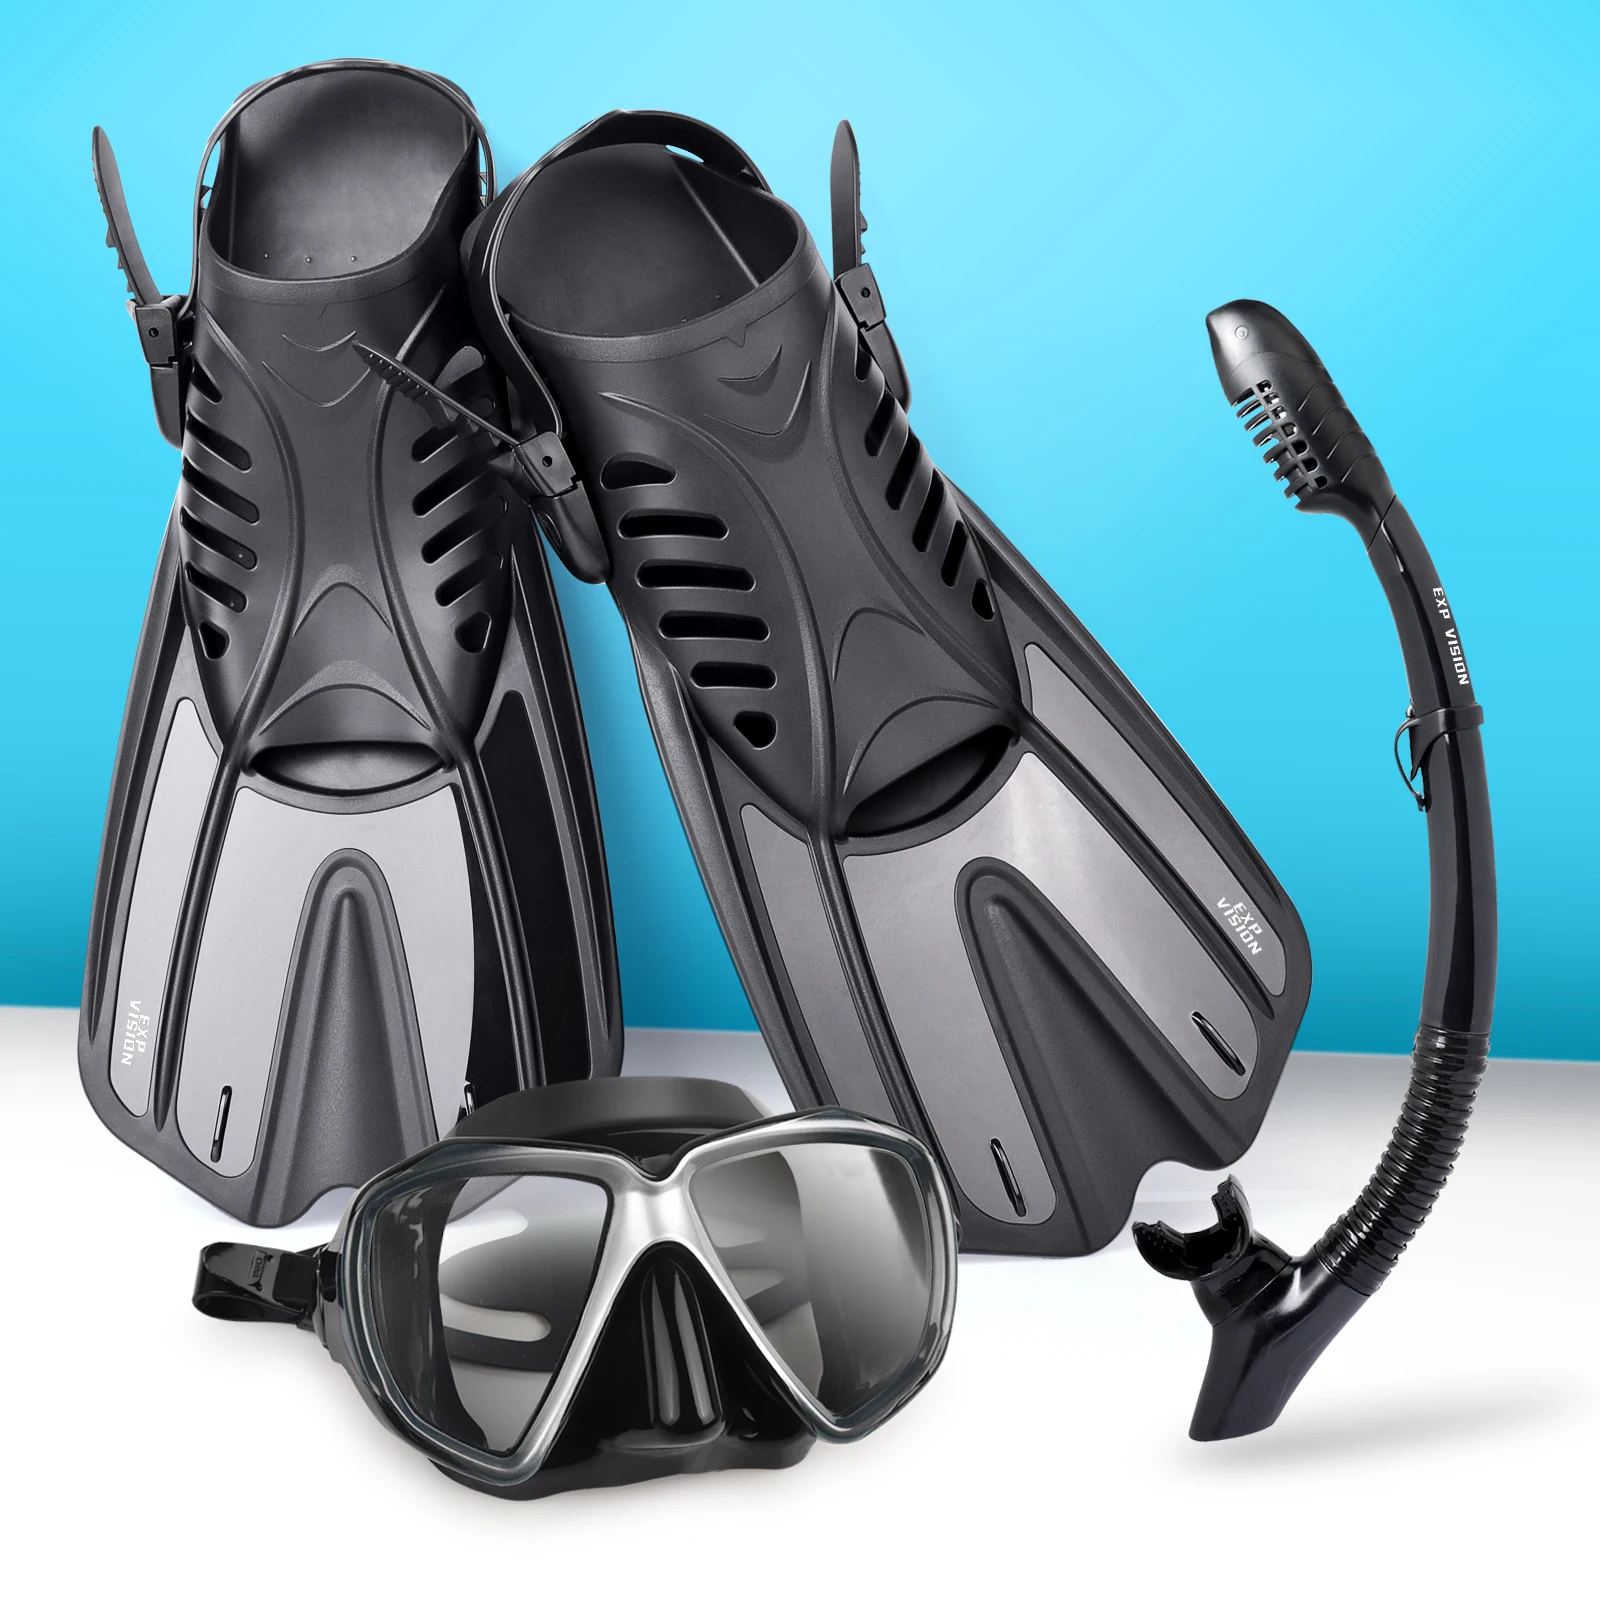 Snorkeling Gear for Adult, Anti-fog Diving Mask, Anti-Leak Dry Top Snorkel and Dive Flippers, Diving Package, 180 °